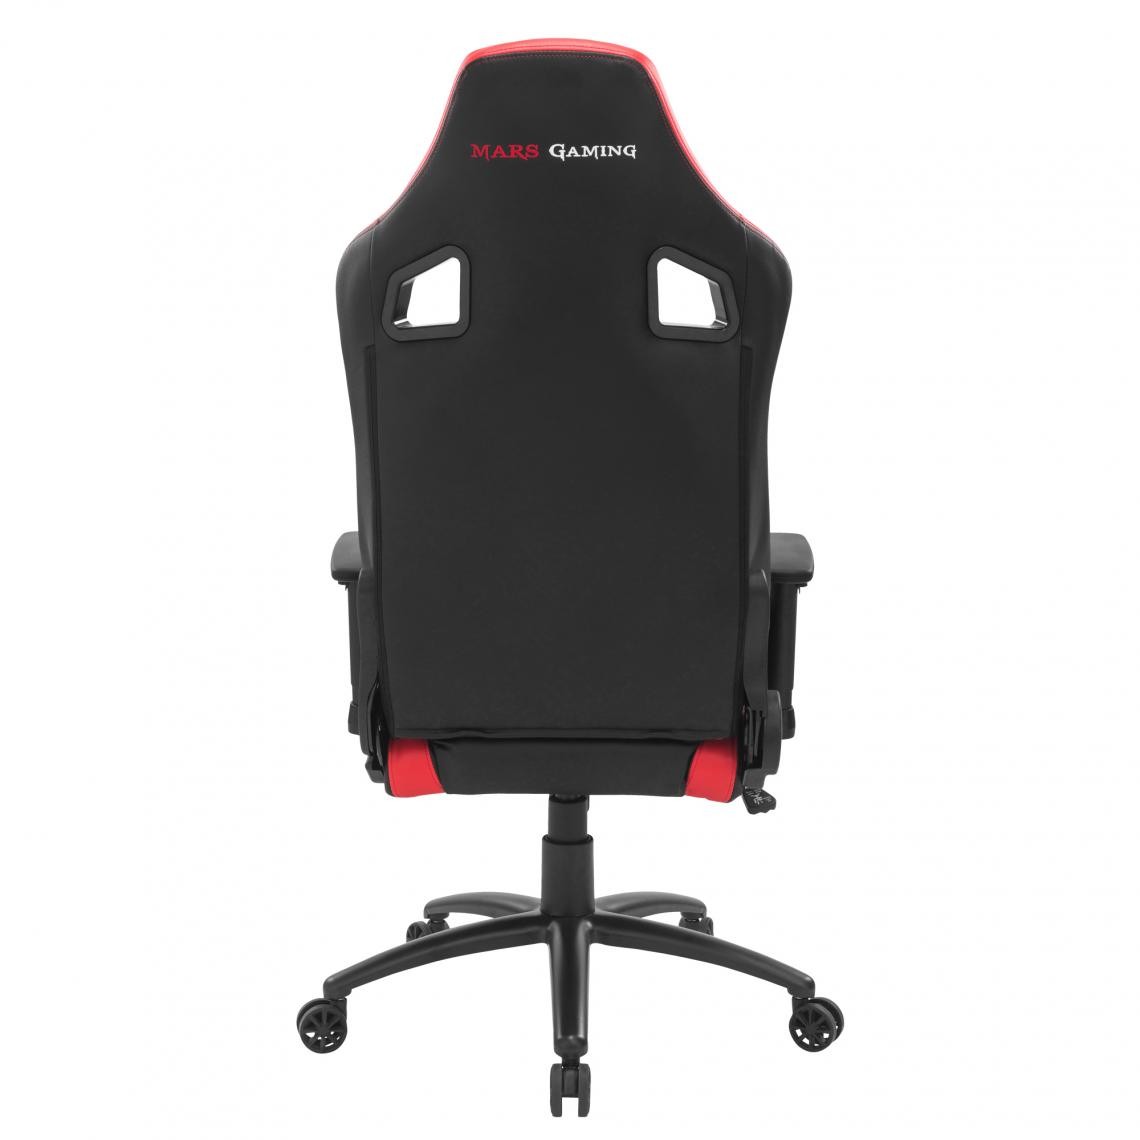 Mars Gaming - Fauteuil MGCX Neo (Noir/Rouge) - Chaise gamer